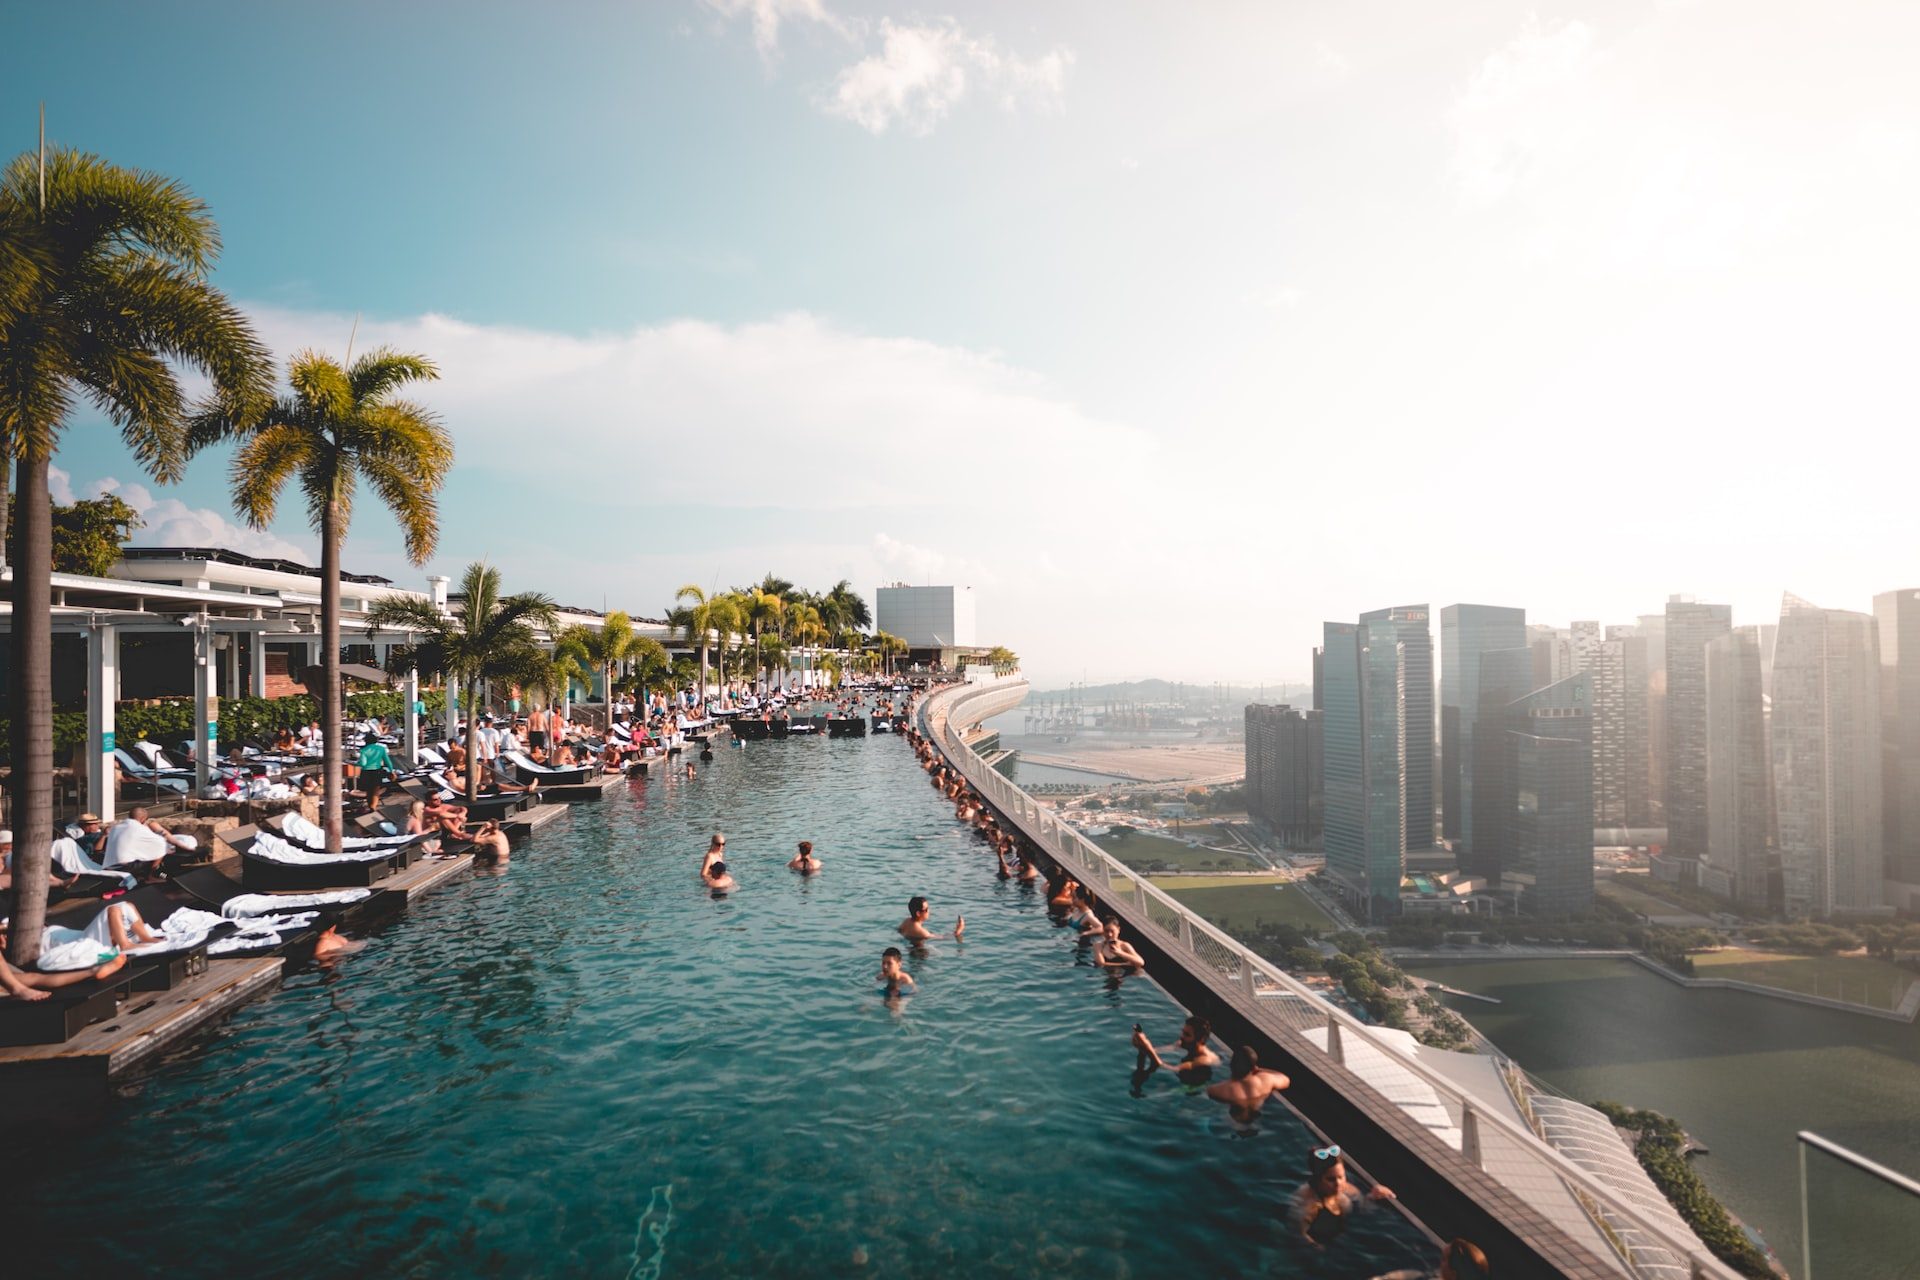 An image of a rooftop pool in Singapore, with a view looking out over the city.